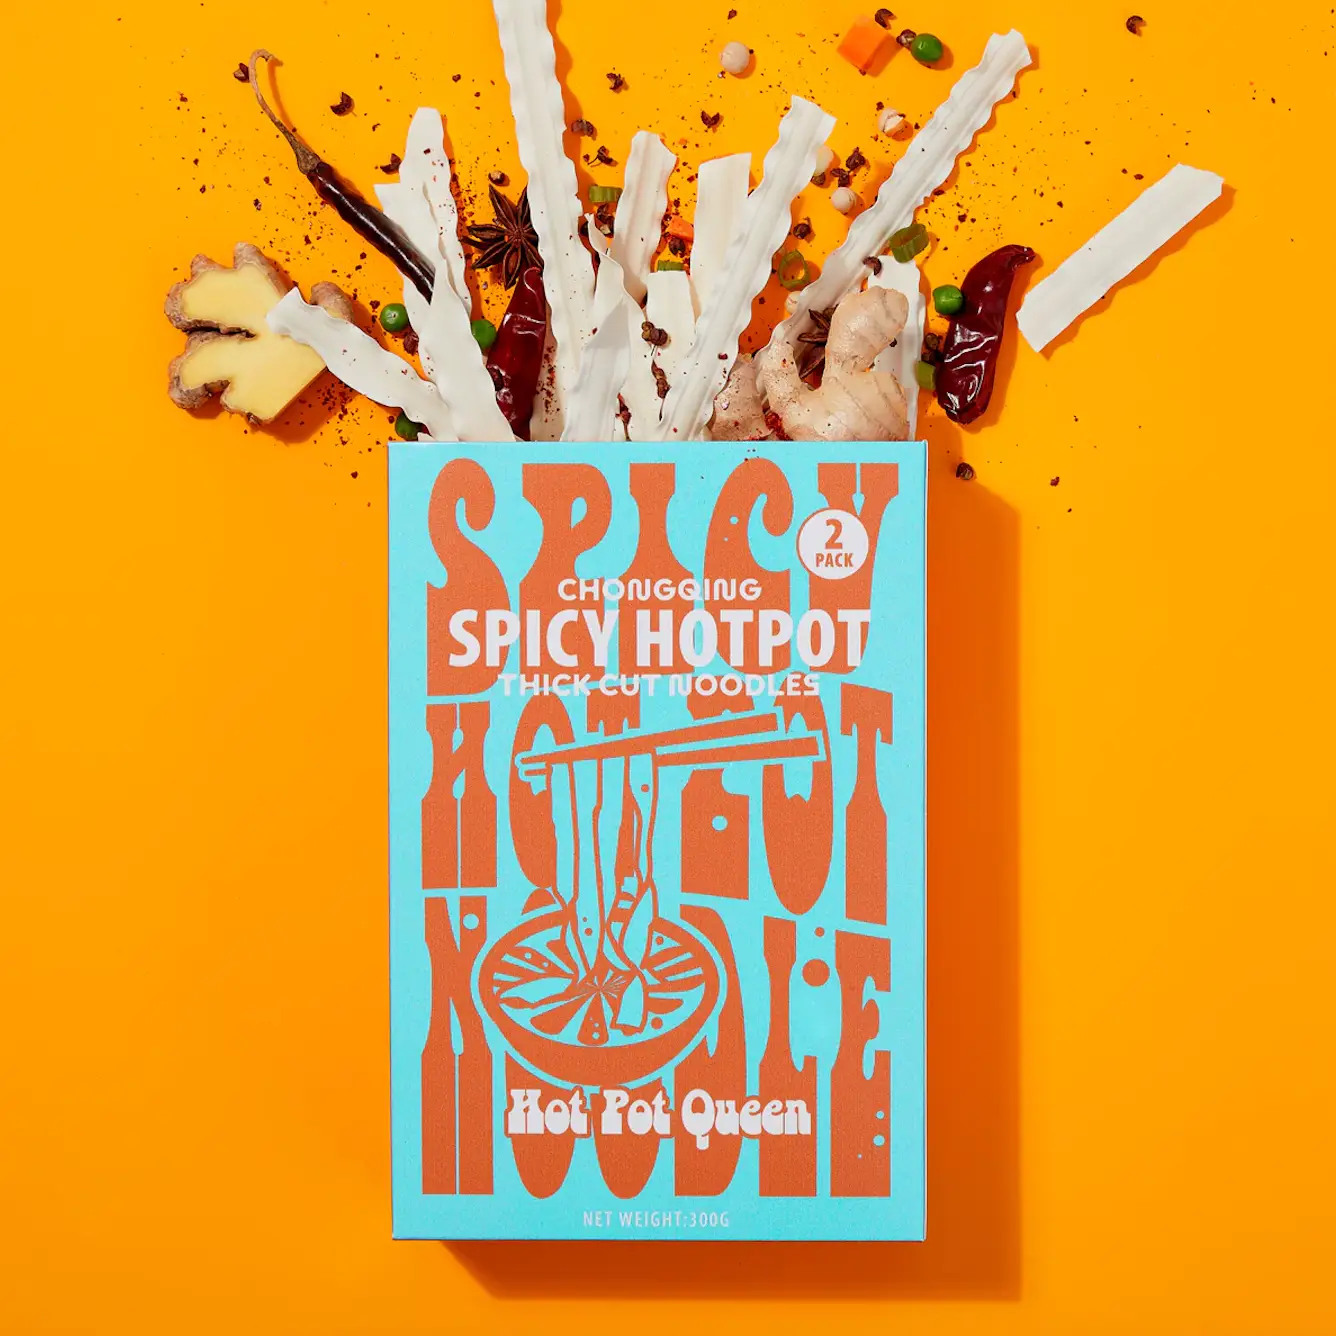 Spicy Hotpot Thick Cut Noodles Delivery